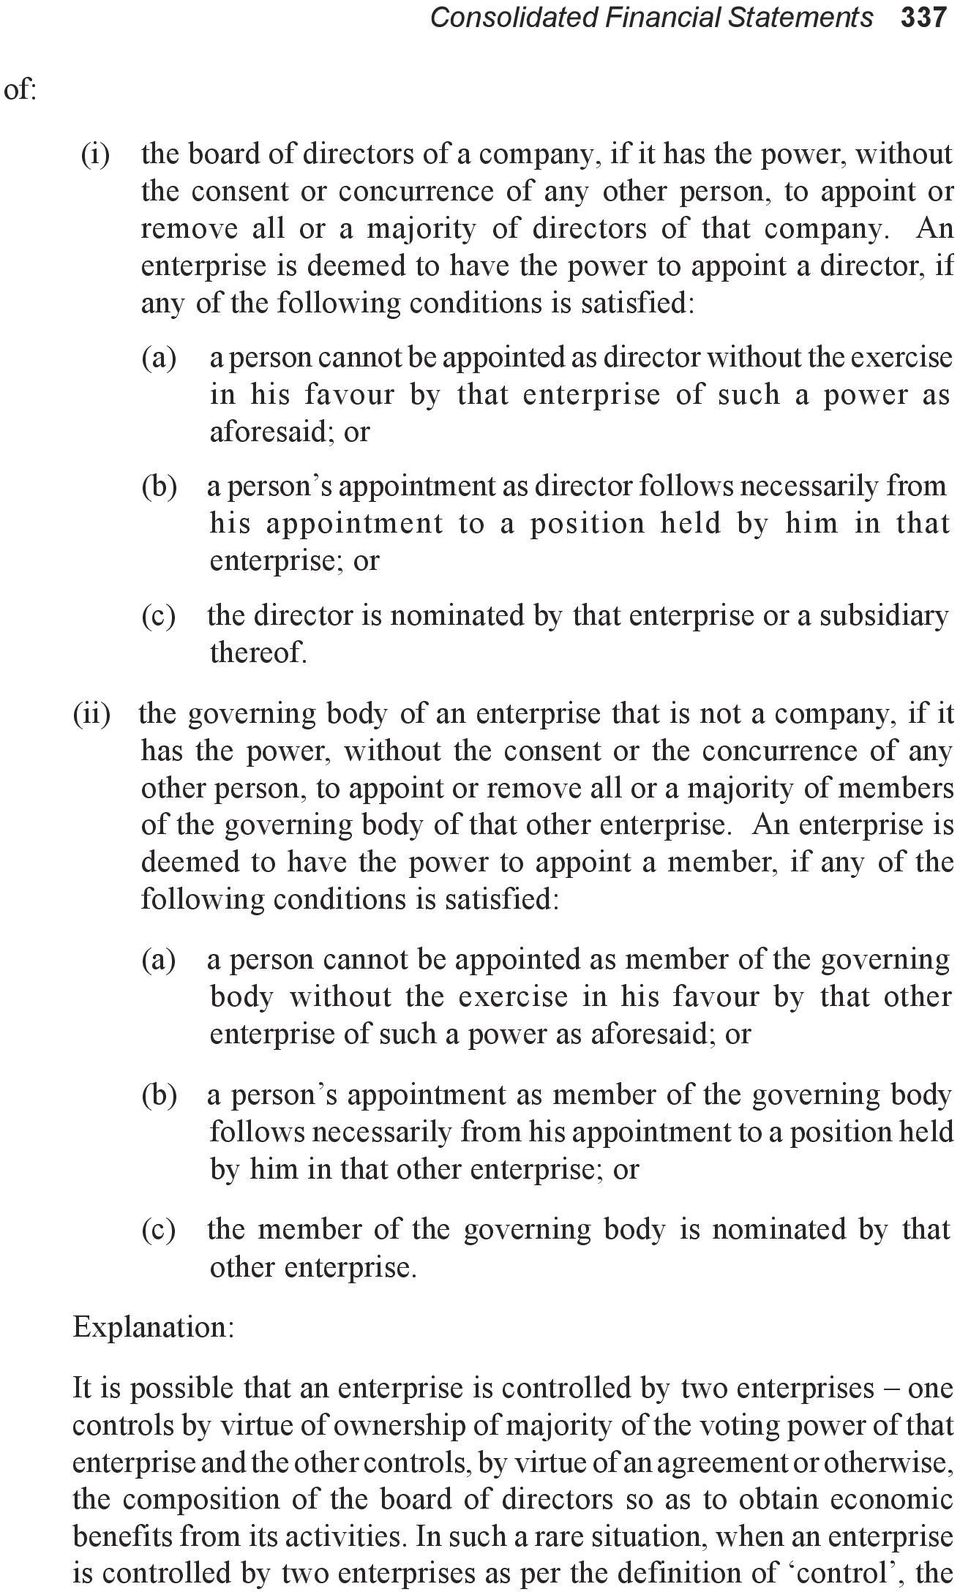 An enterprise is deemed to have the power to appoint a director, if any of the following conditions is satisfied: (a) a person cannot be appointed as director without the exercise in his favour by